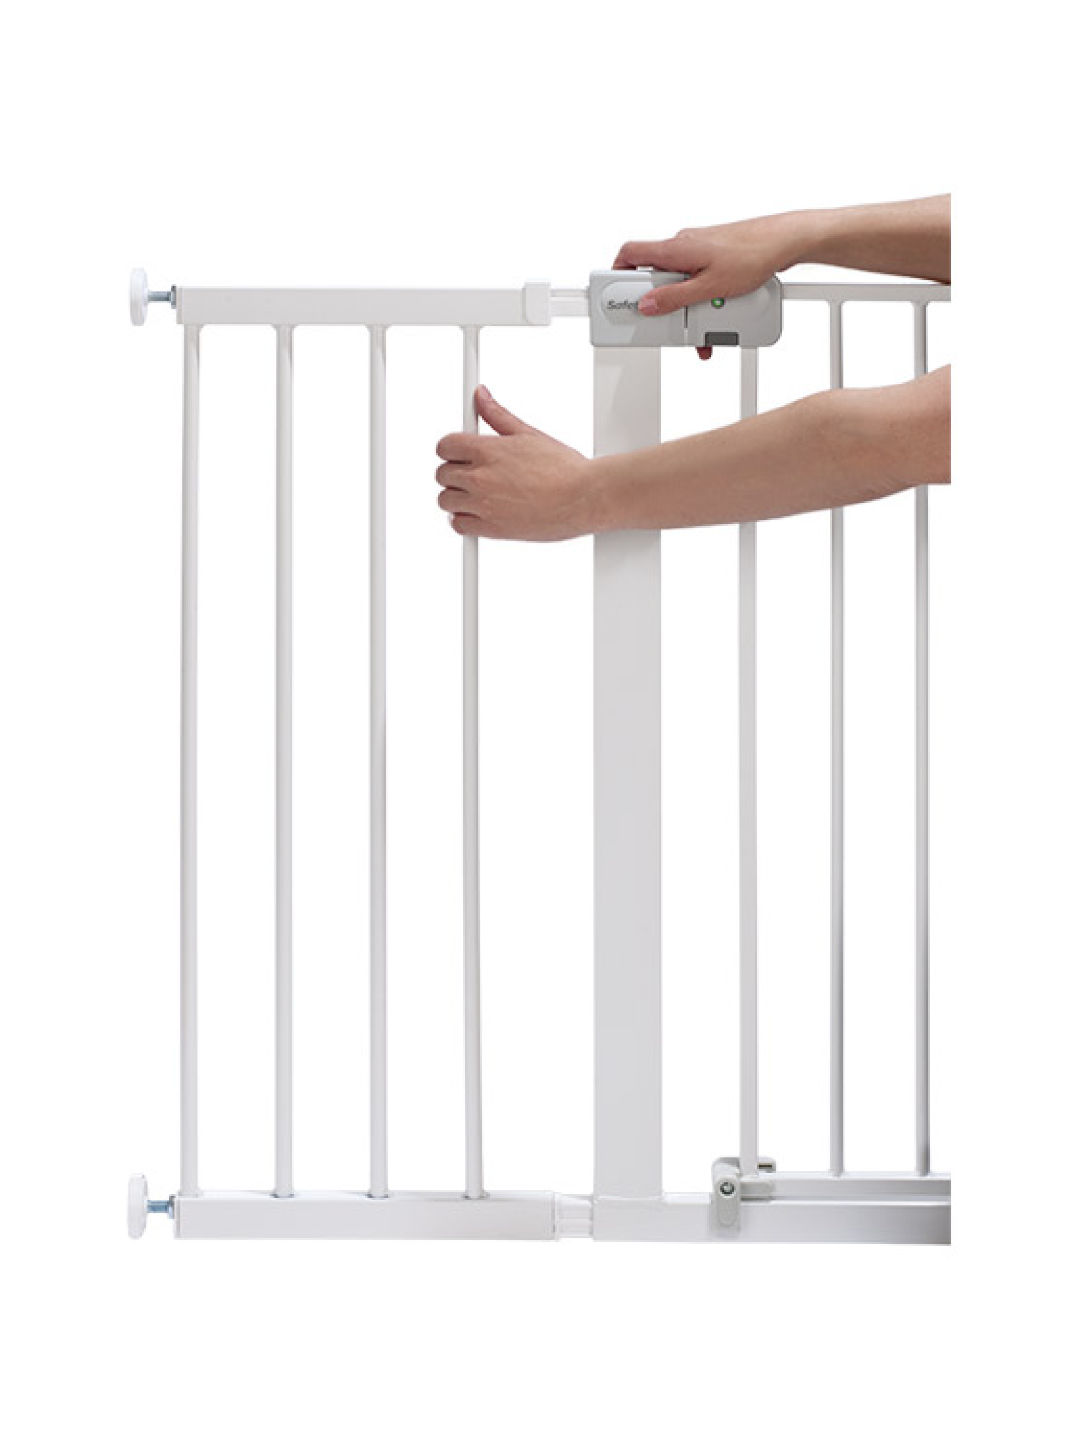 Safety 1st Easy Close Gate U-Pressure Extension (28 cm) (White- Image 1)